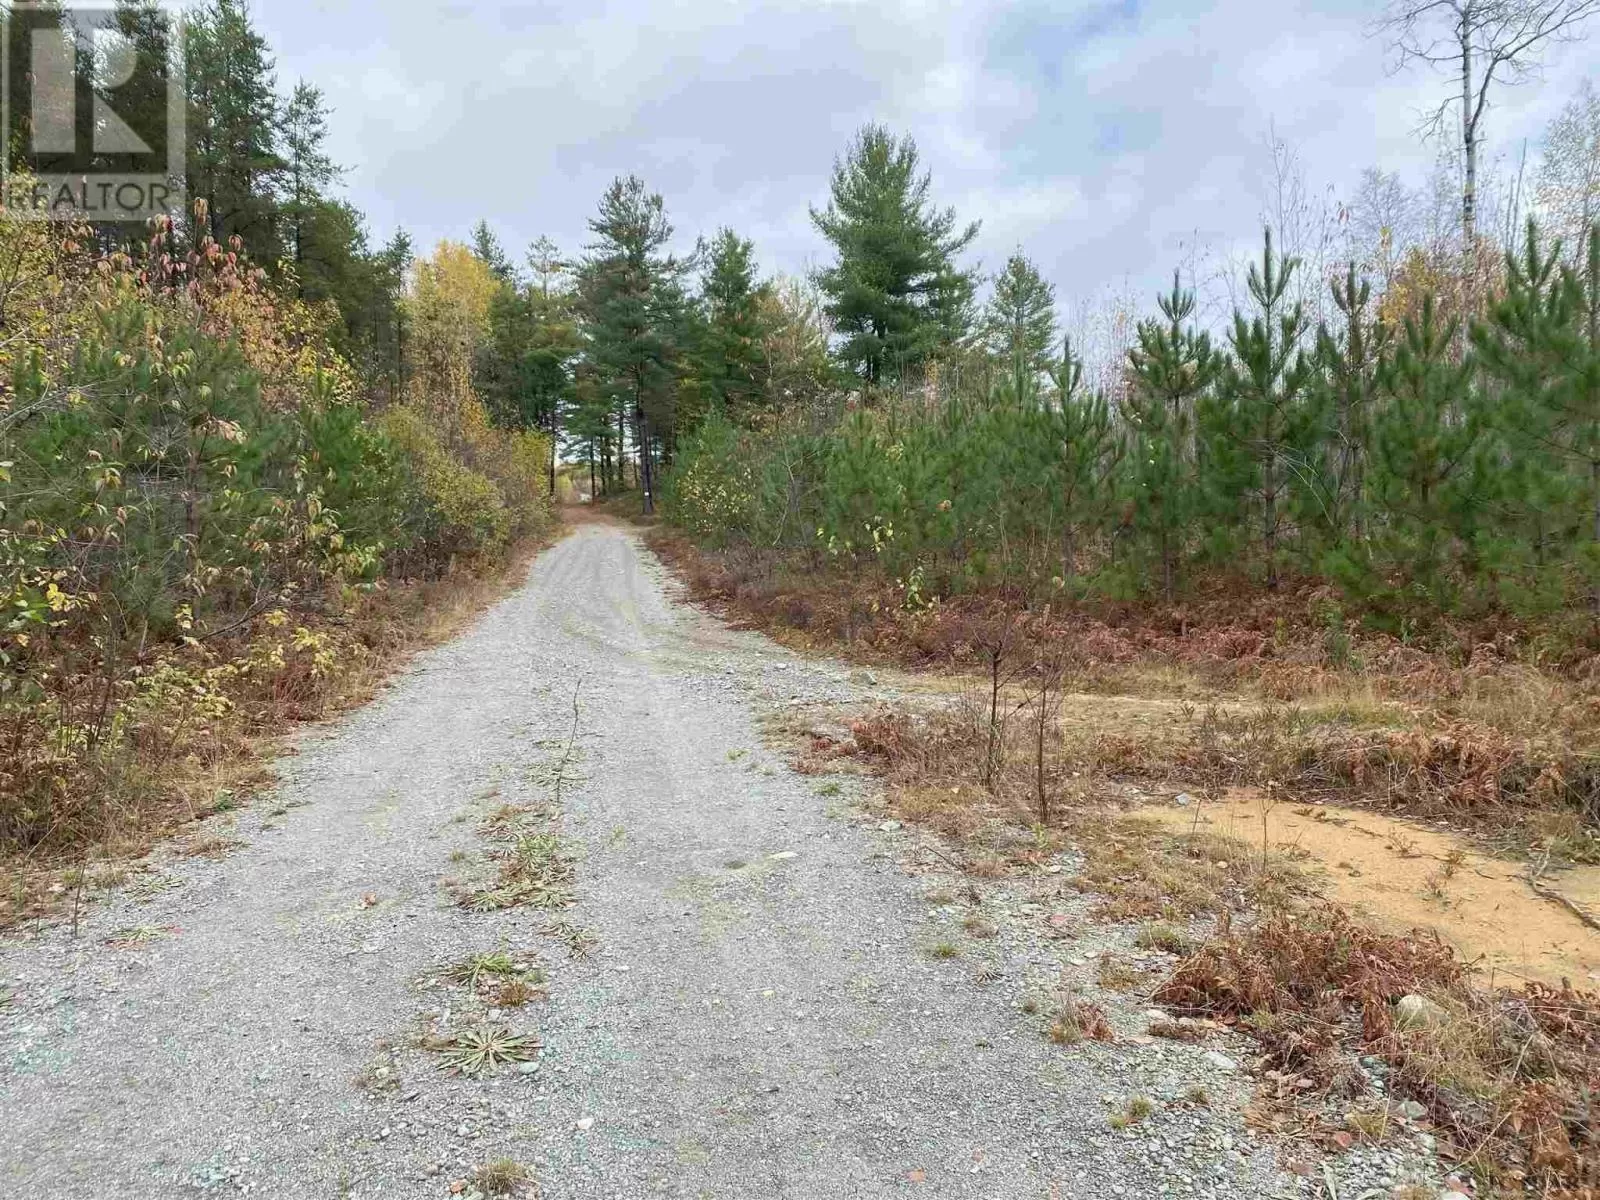 Lot 1 Con 5 Pcl 6283, 6284, 6285, 6286 West Of Road, Marter TWP, Ontario P0J 1H0